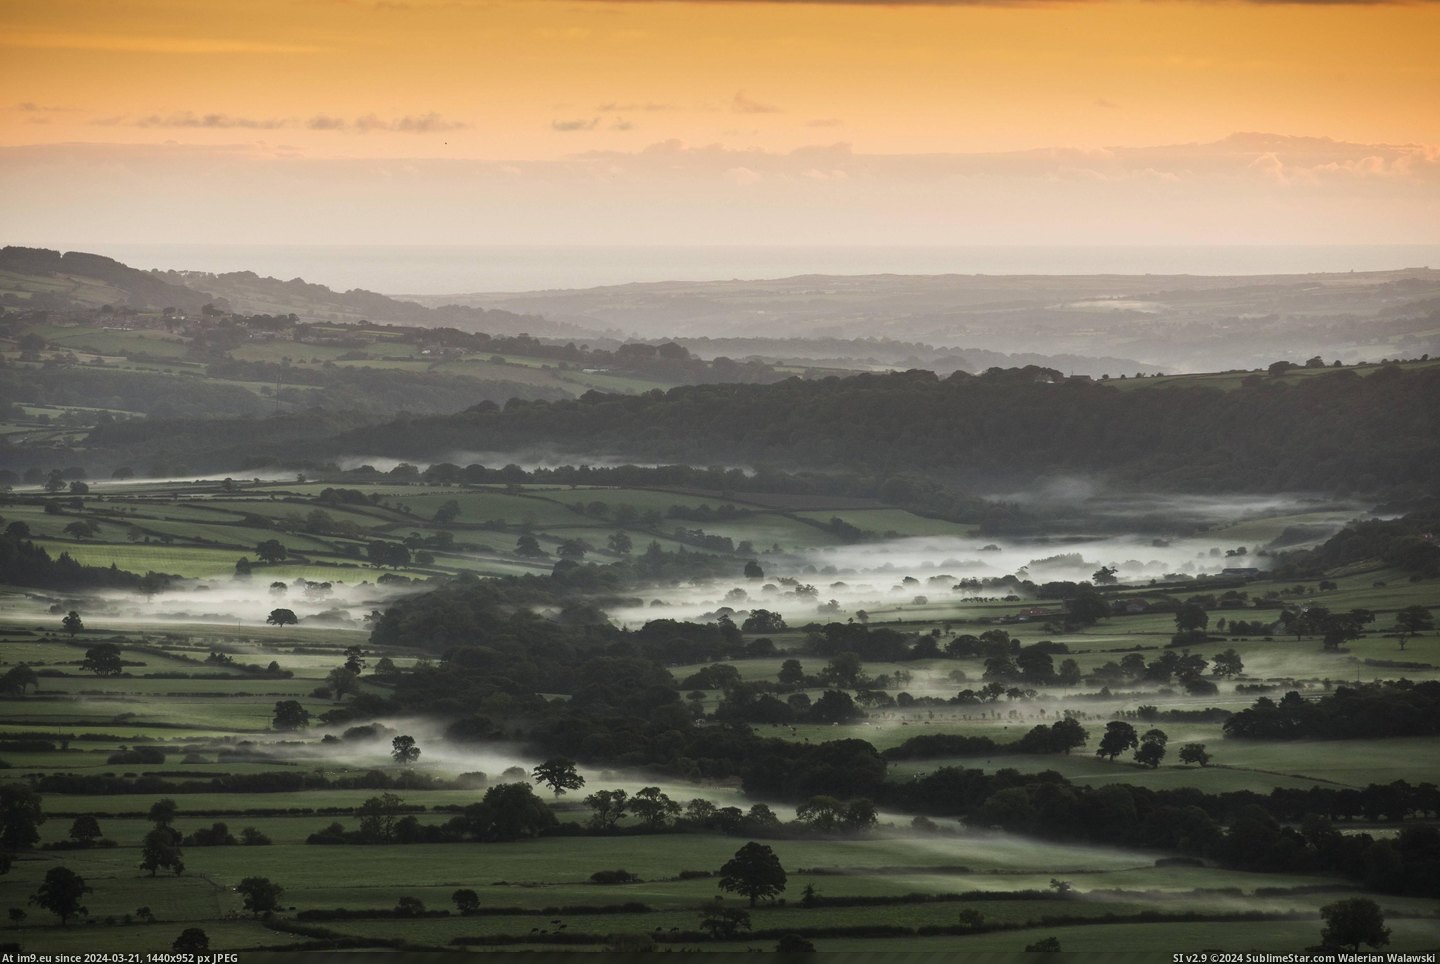 #Valley #North #Sunrise #Moors #Goathland #Lies #Mist #Yorkshire [Earthporn] Mist lies in a valley near Goathland in the North Yorkshire Moors at sunrise. [4666x3098] Pic. (Изображение из альбом My r/EARTHPORN favs))